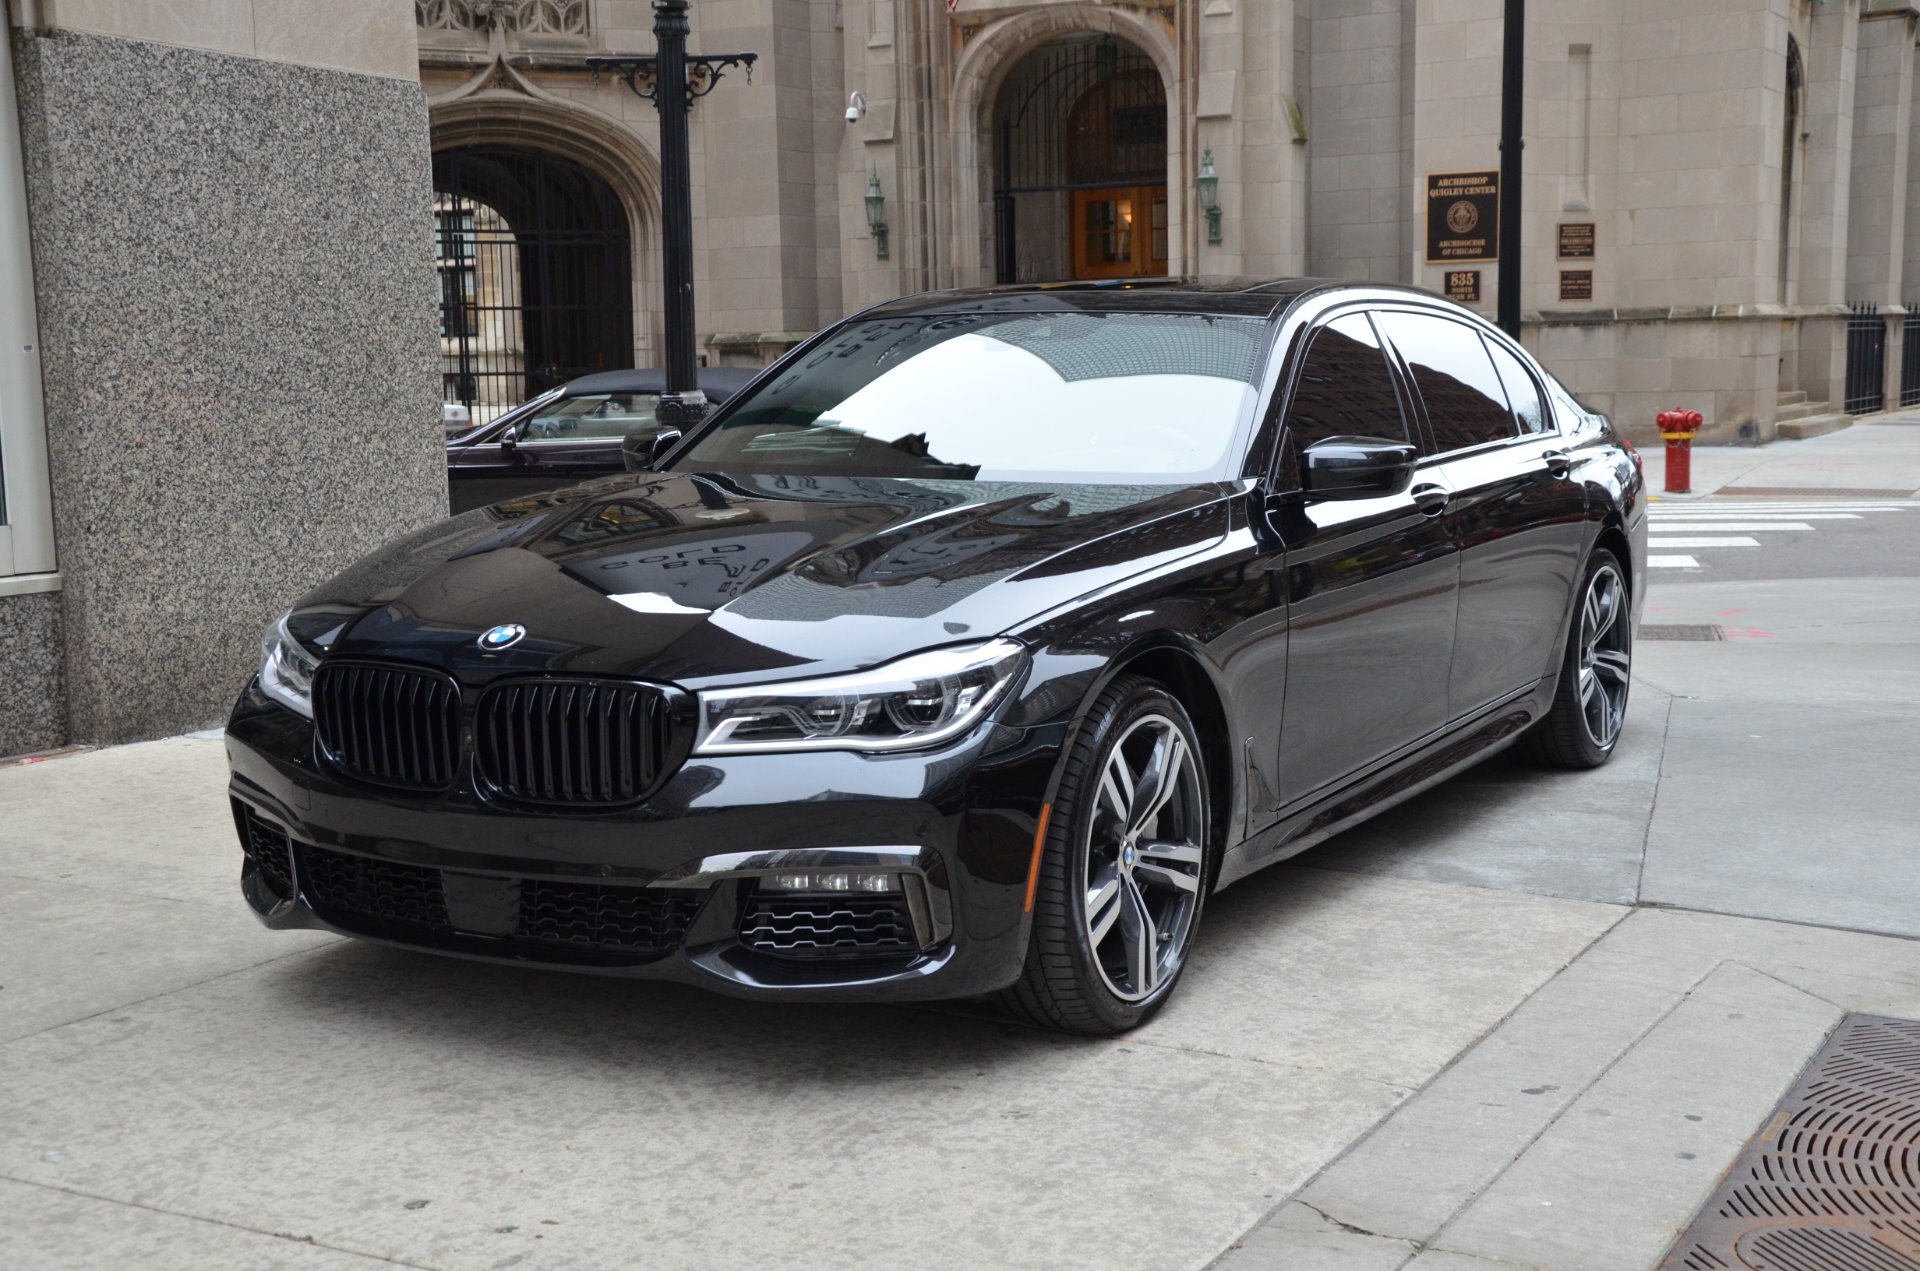 2016 BMW 7 Series 750i xDrive Stock # B863A for sale near Chicago, IL ...